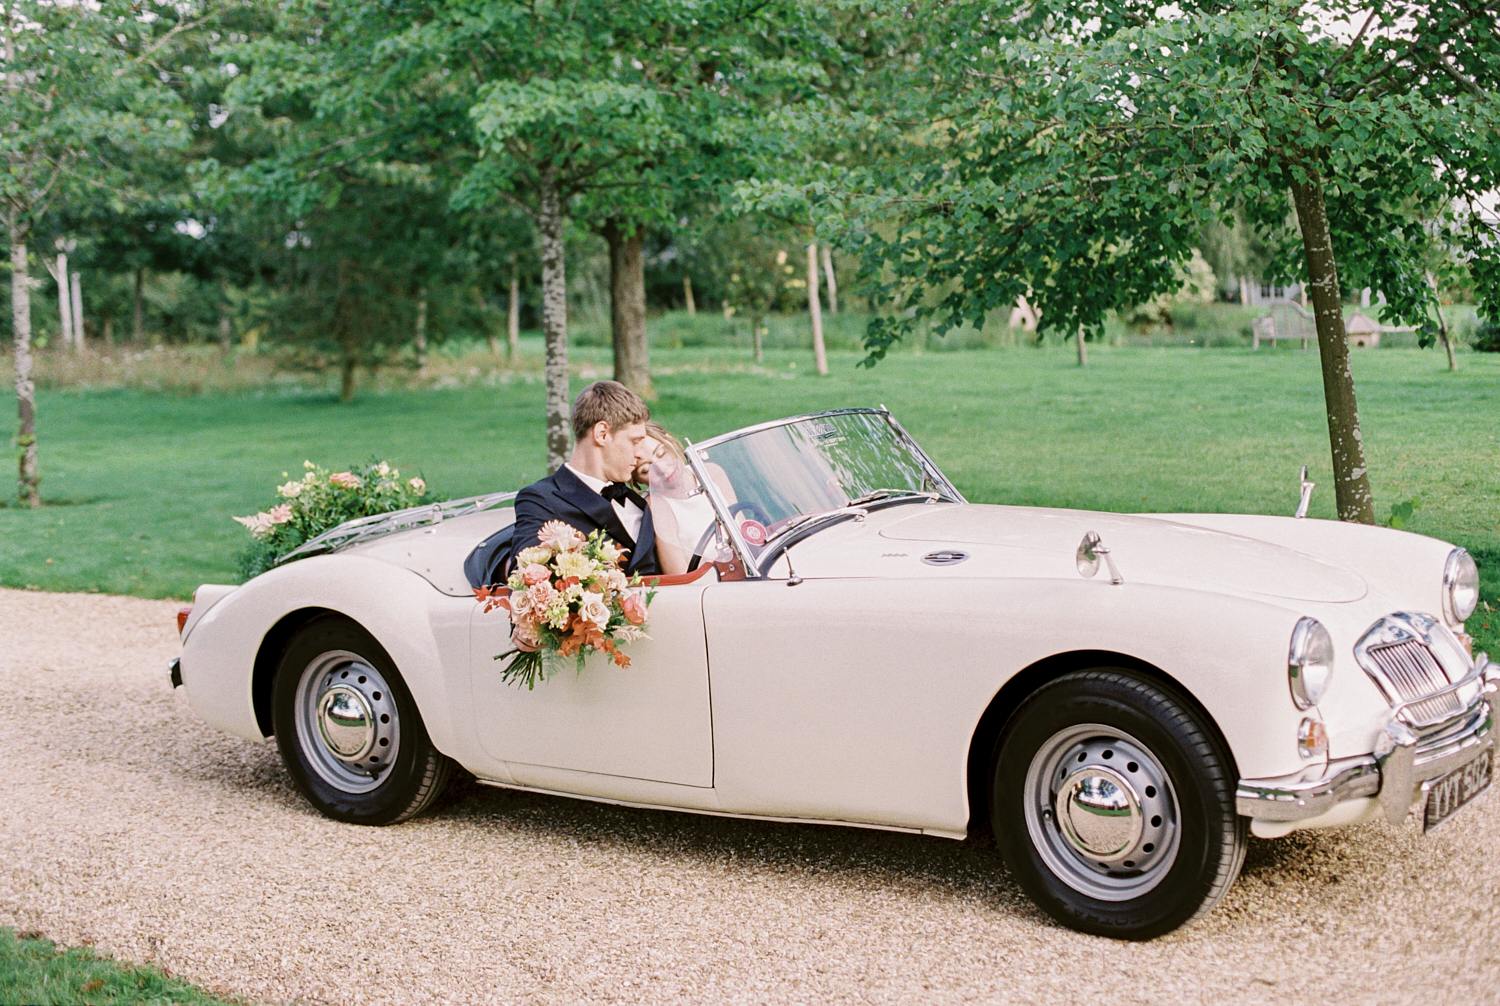 married couple sitting in classic vintage wedding car decorated with peach colour flowers and greenery